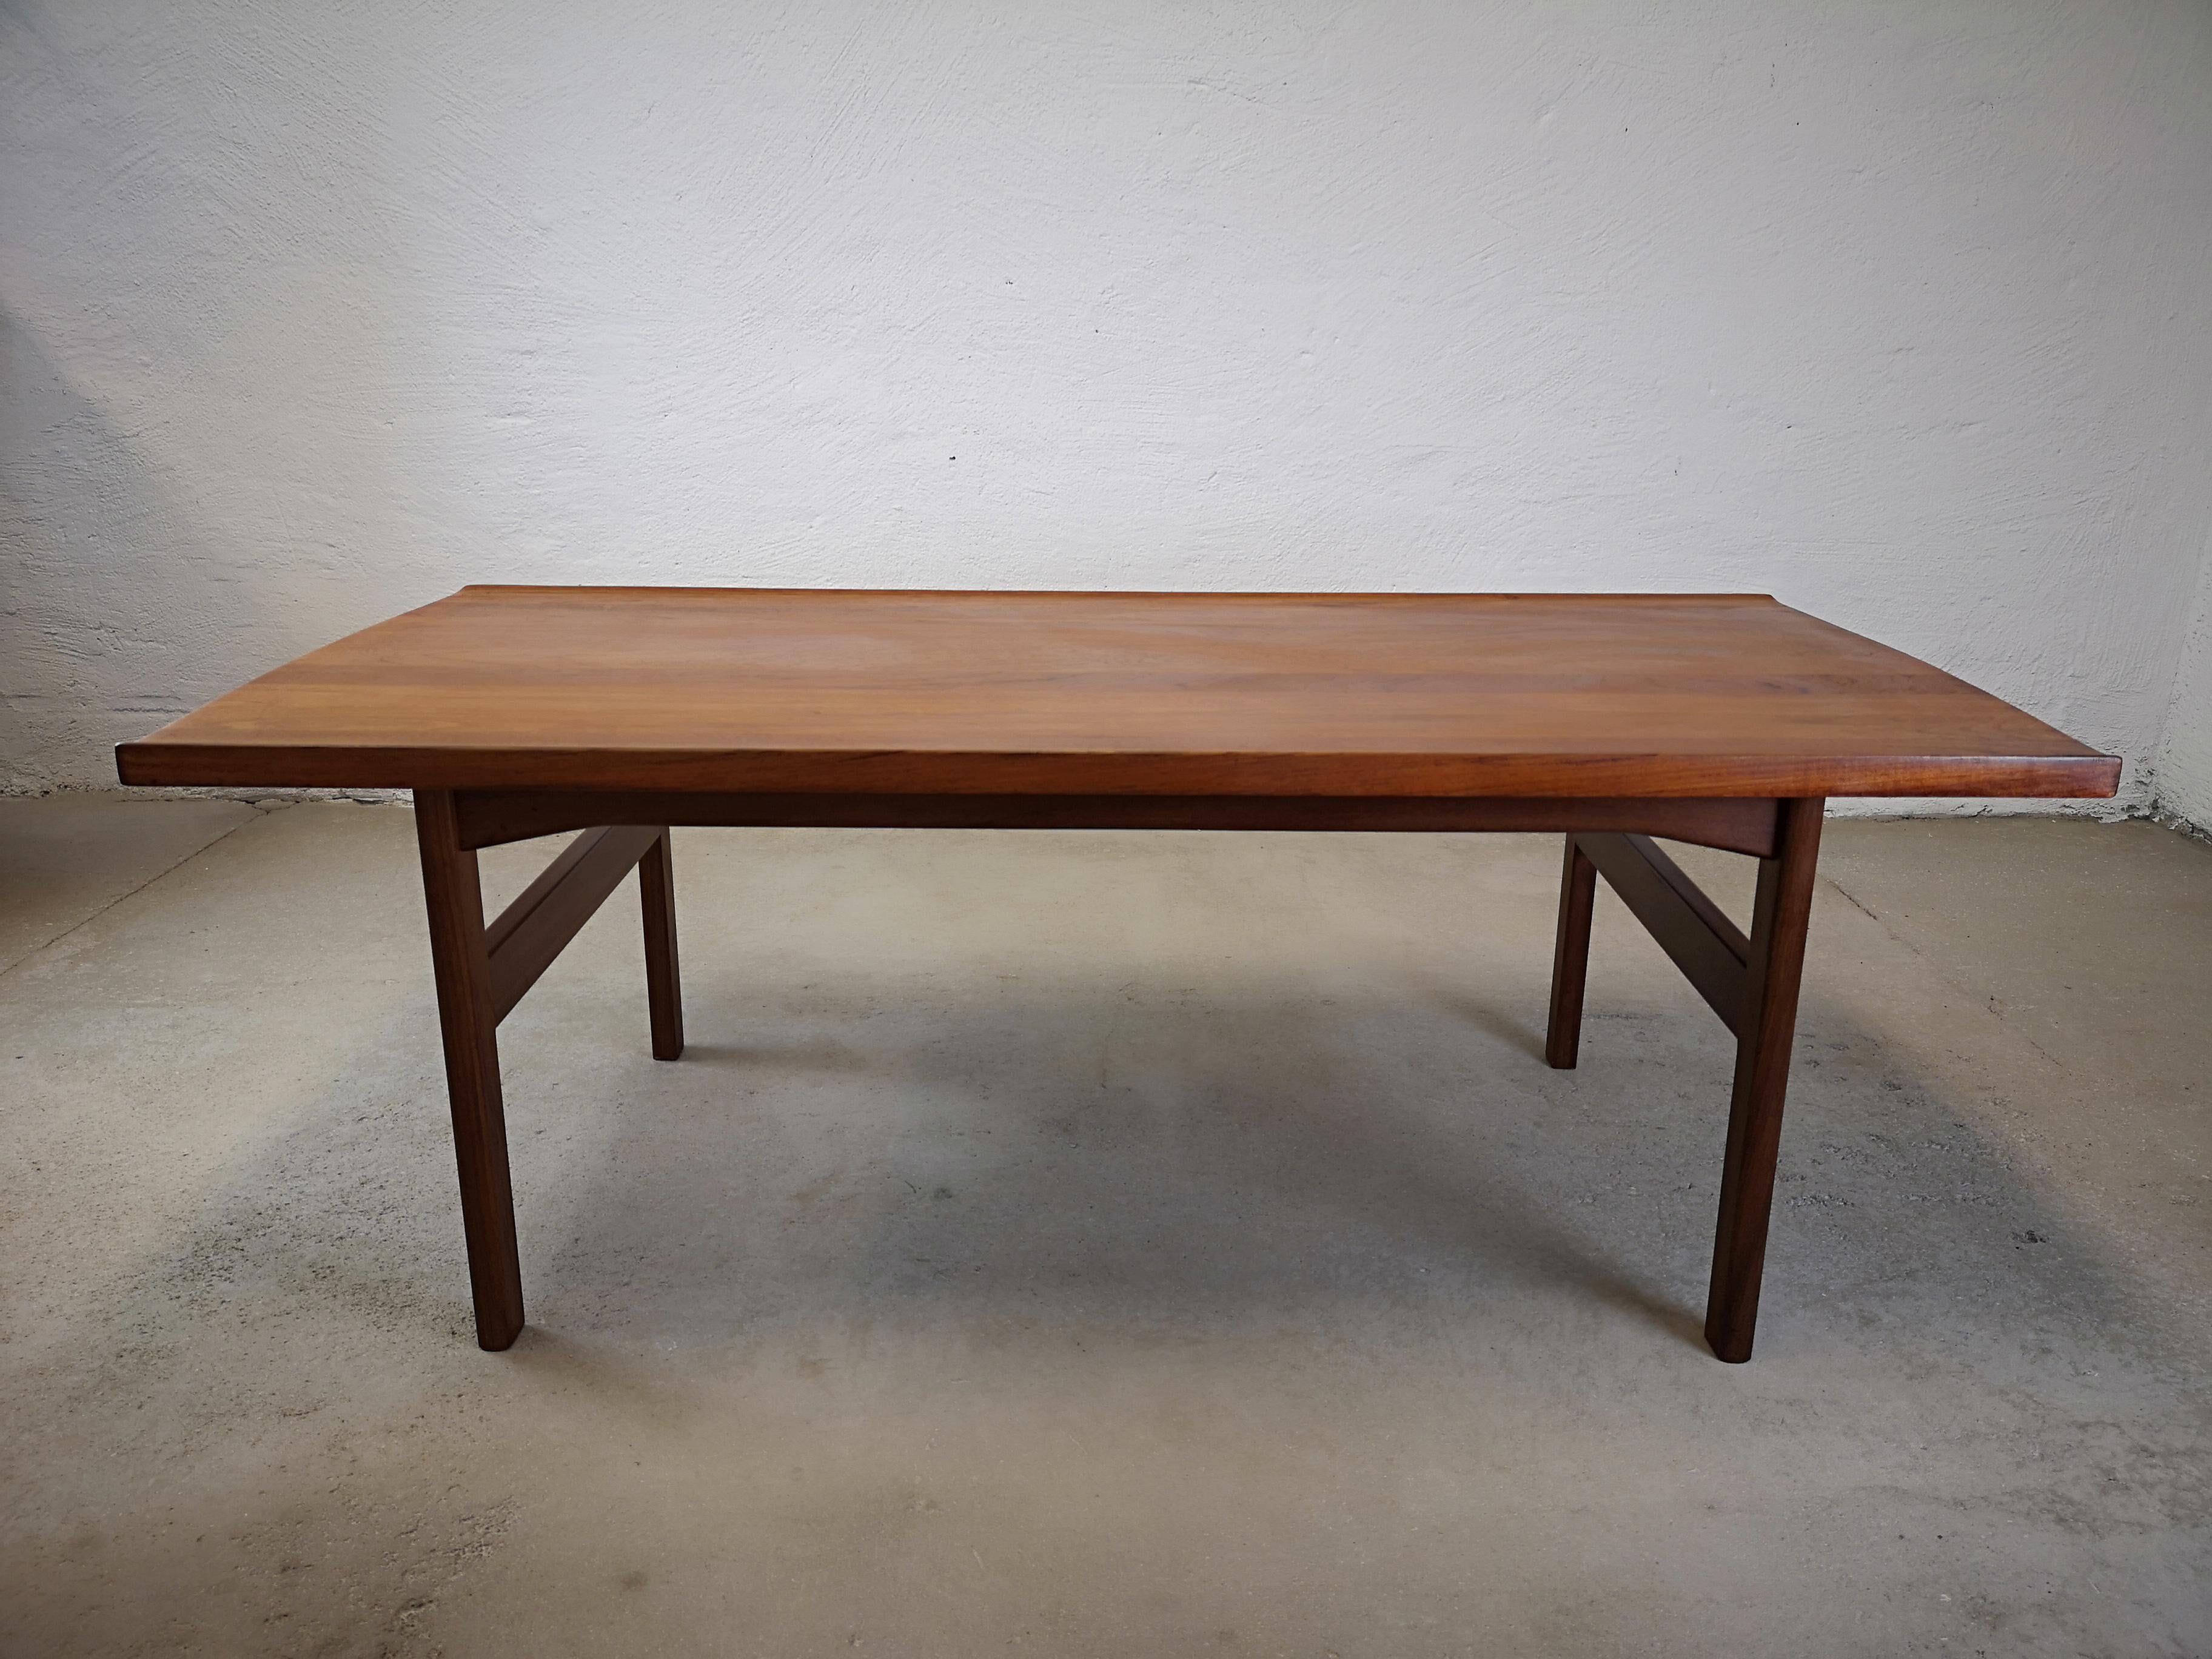 Teak coffee table made in Sweden by Seffle Möbelfabrik. Designed by Tove and Edvard Kindt Larsen. The detailed solid teak table featuring lipped edge top with two elegantly curved sides.
The curved edges have an nice inlay of lighter wood with